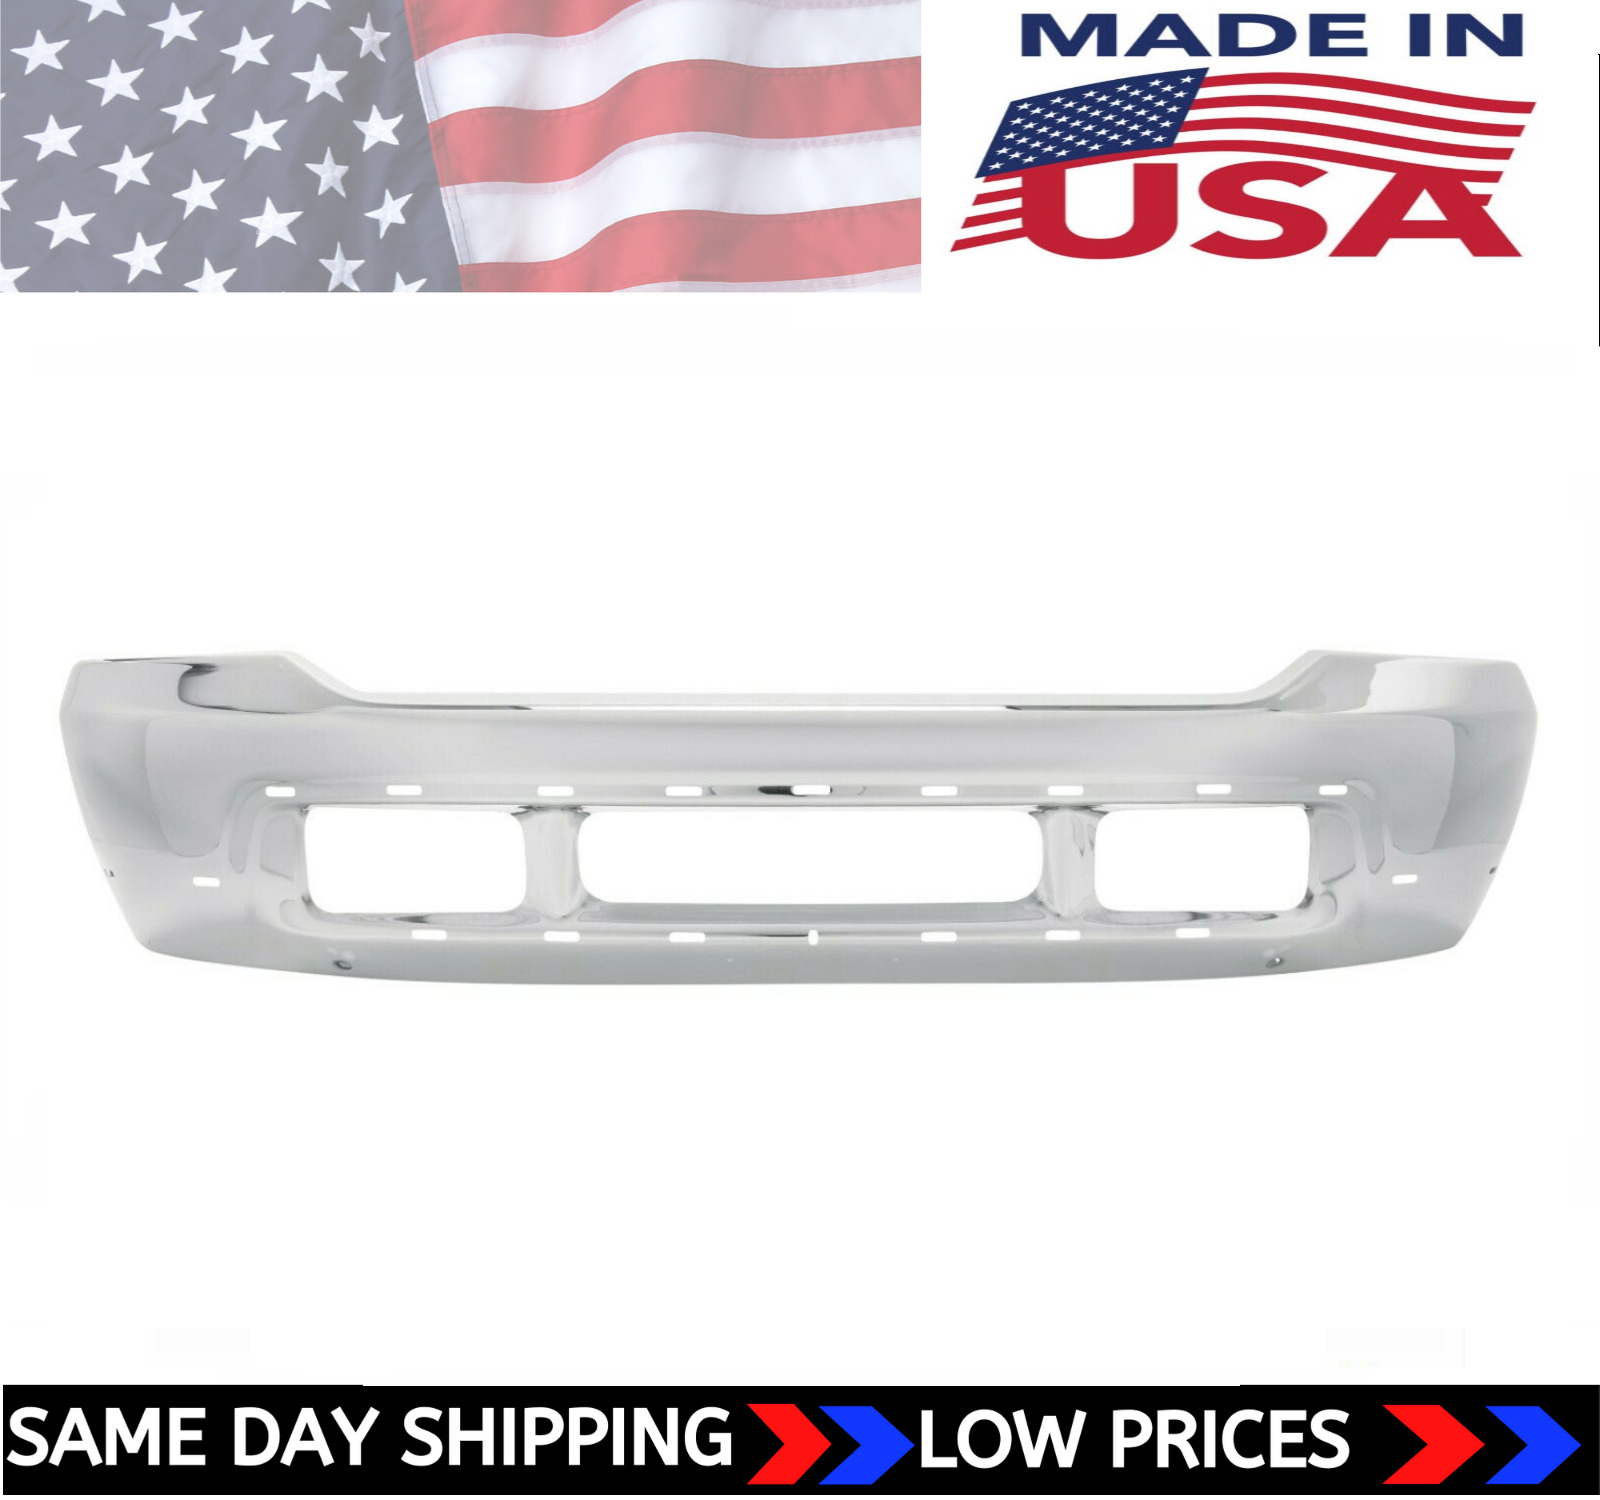 NEW USA Made Chrome Front Bumper For 1999-2004 Ford F-250 F-350